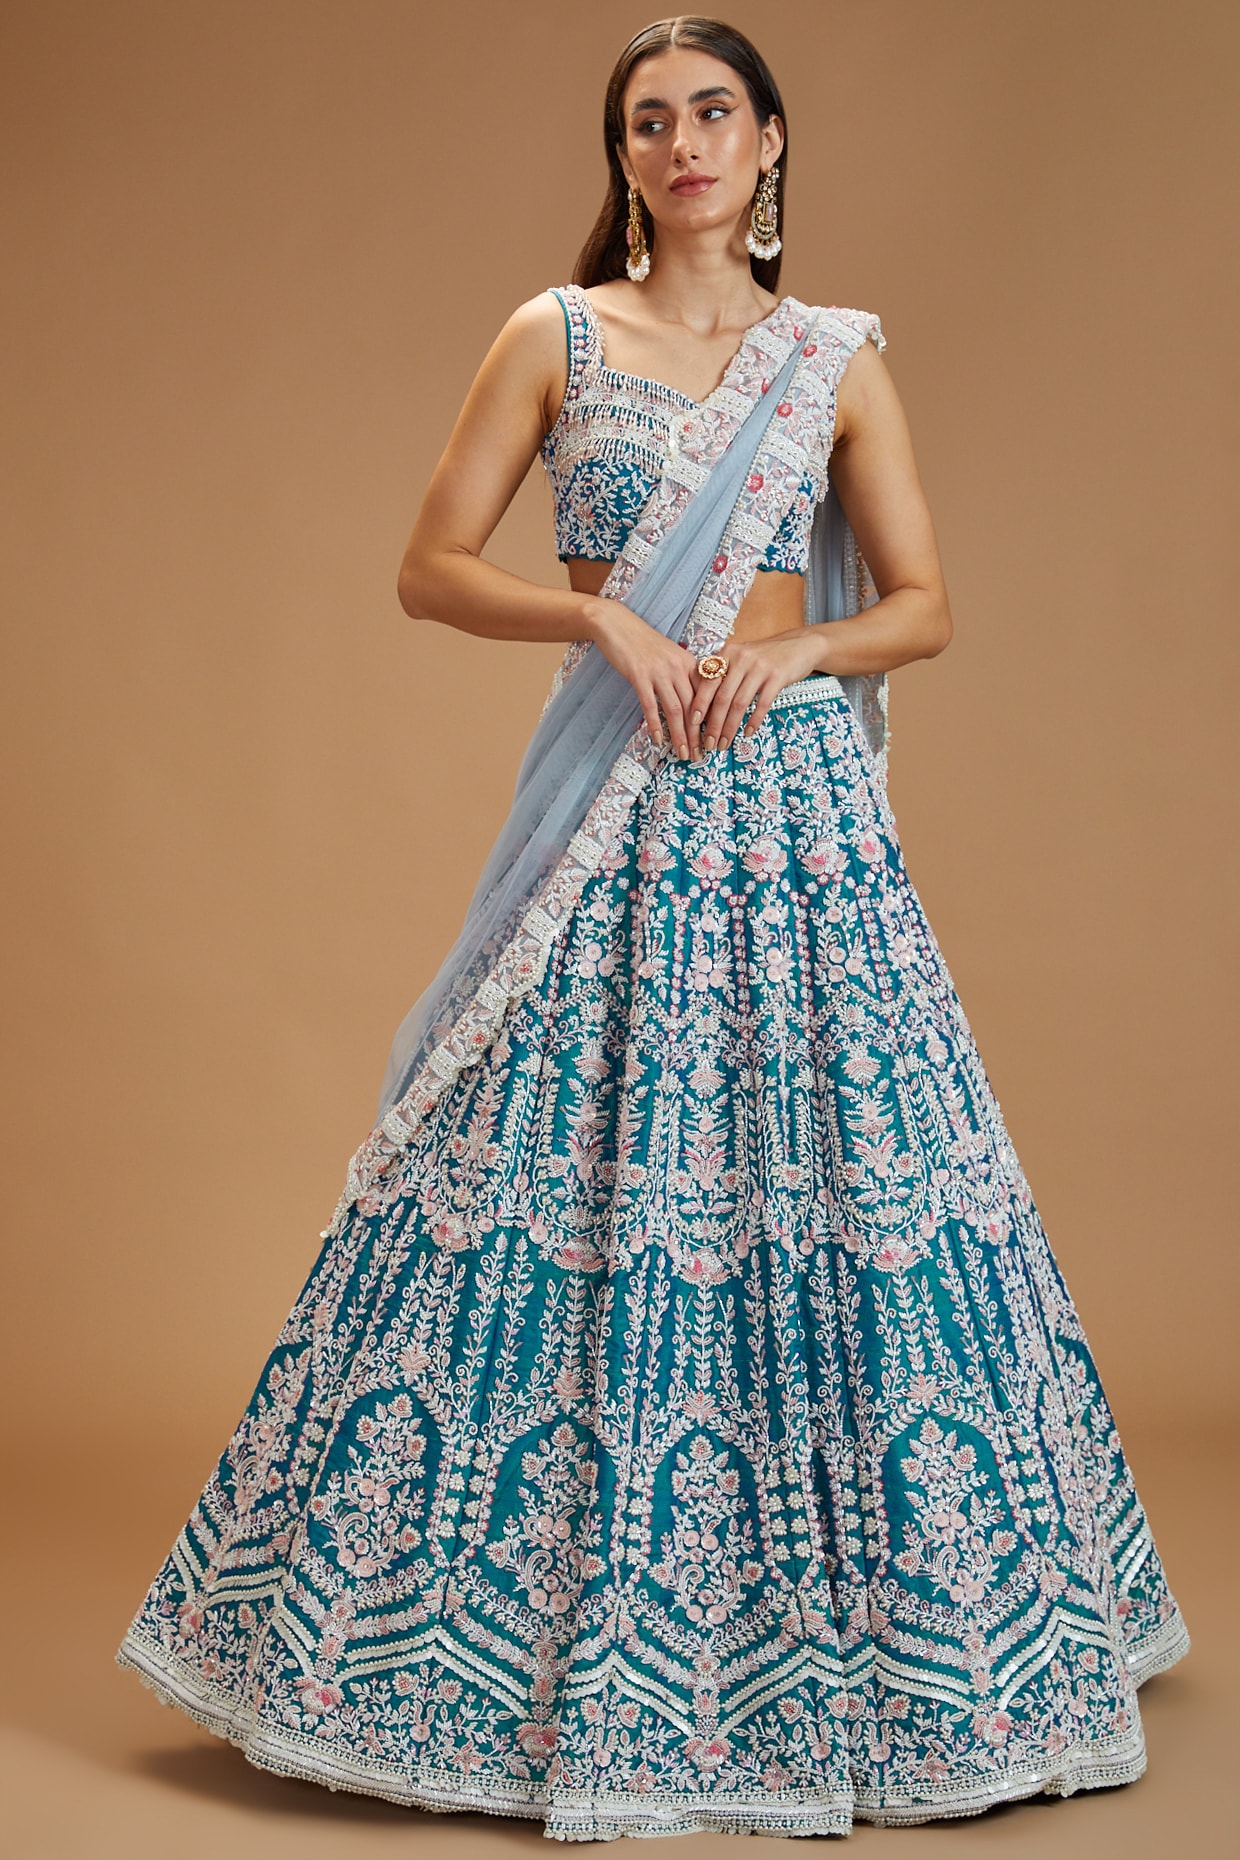 Shop Saree Gown Patterns for Women Online from India's Luxury Designers 2024